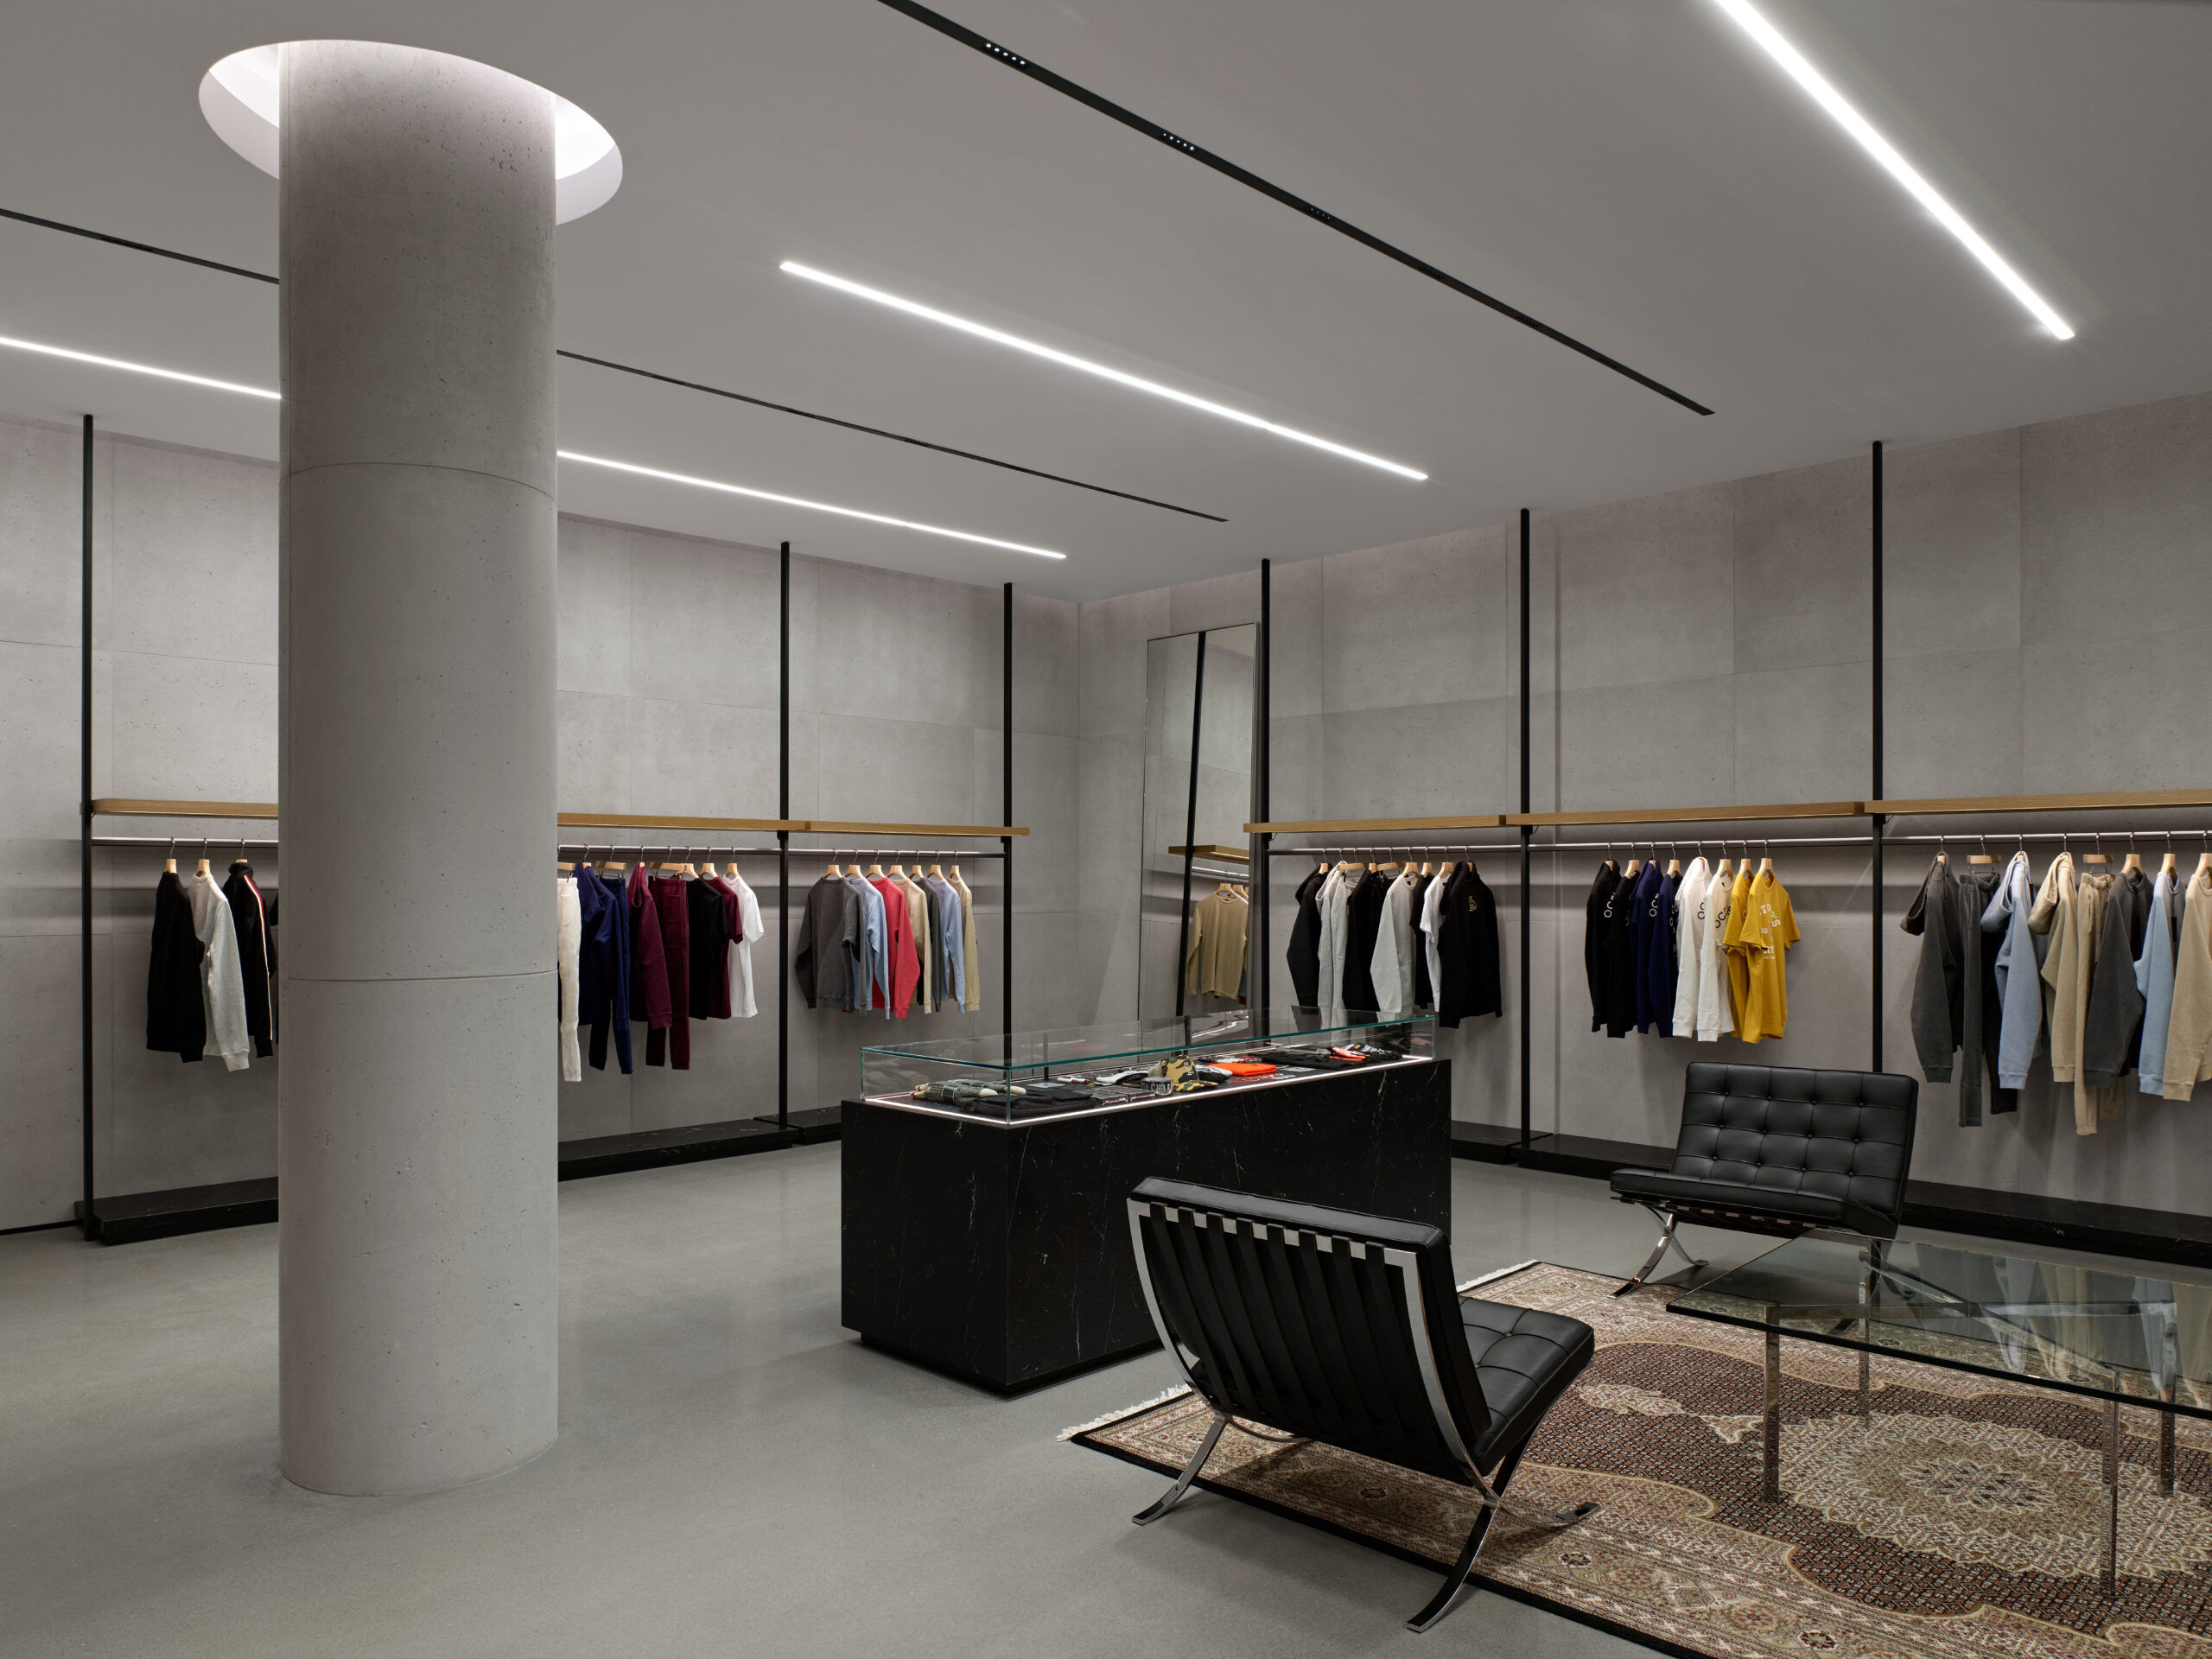 Modern retail space, concrete cladding, concrete pillar with clothing displays and seating area. 